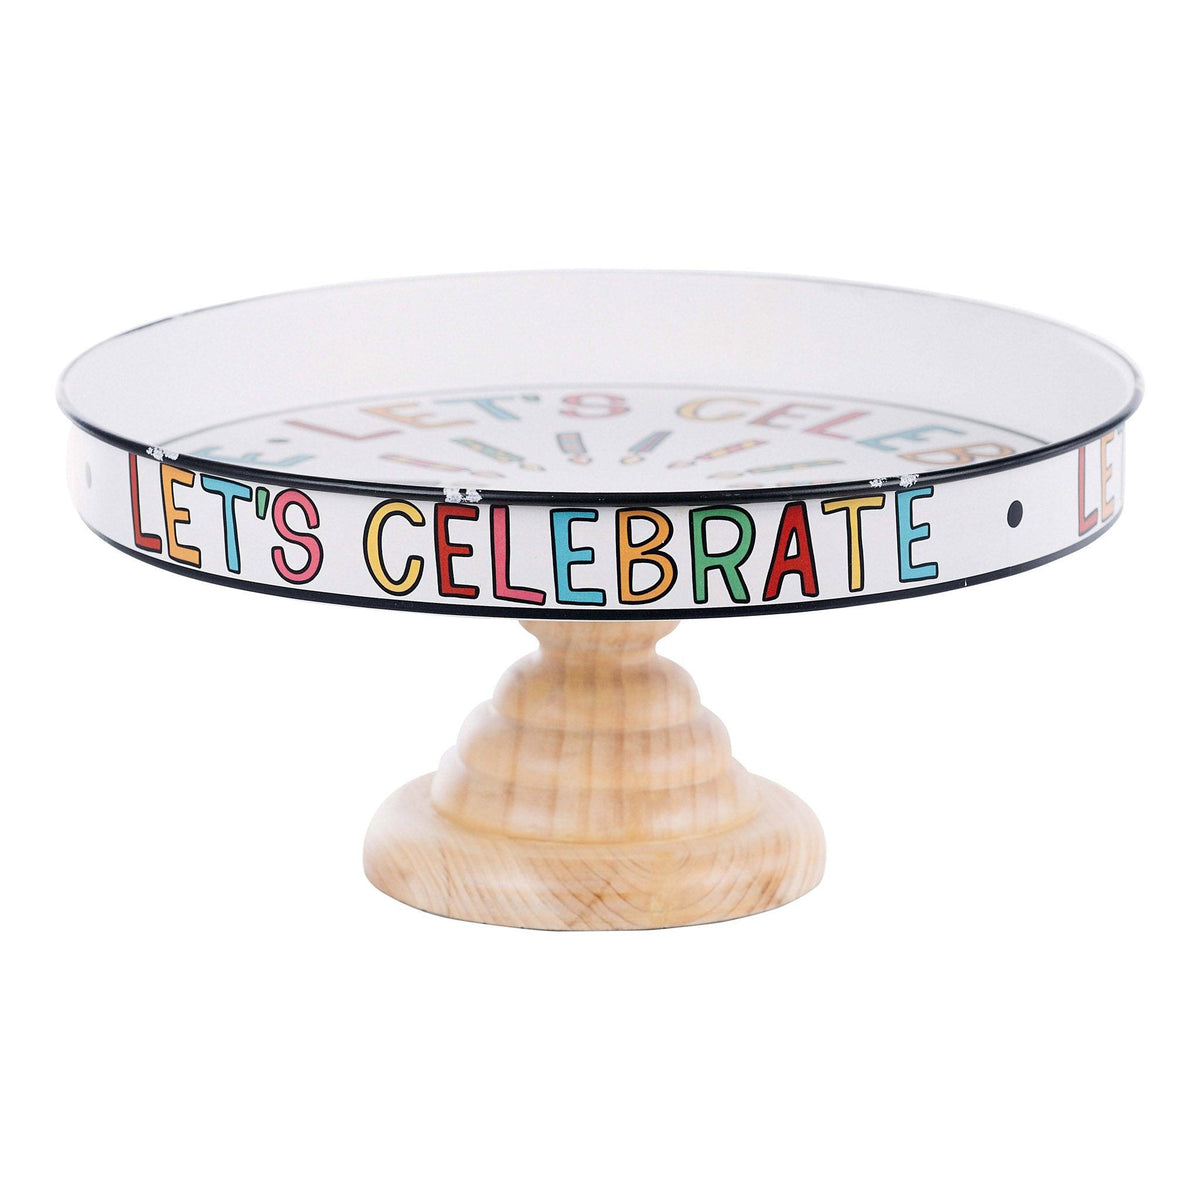 Let's Celebrate Cake Stand - GLORY HAUS 